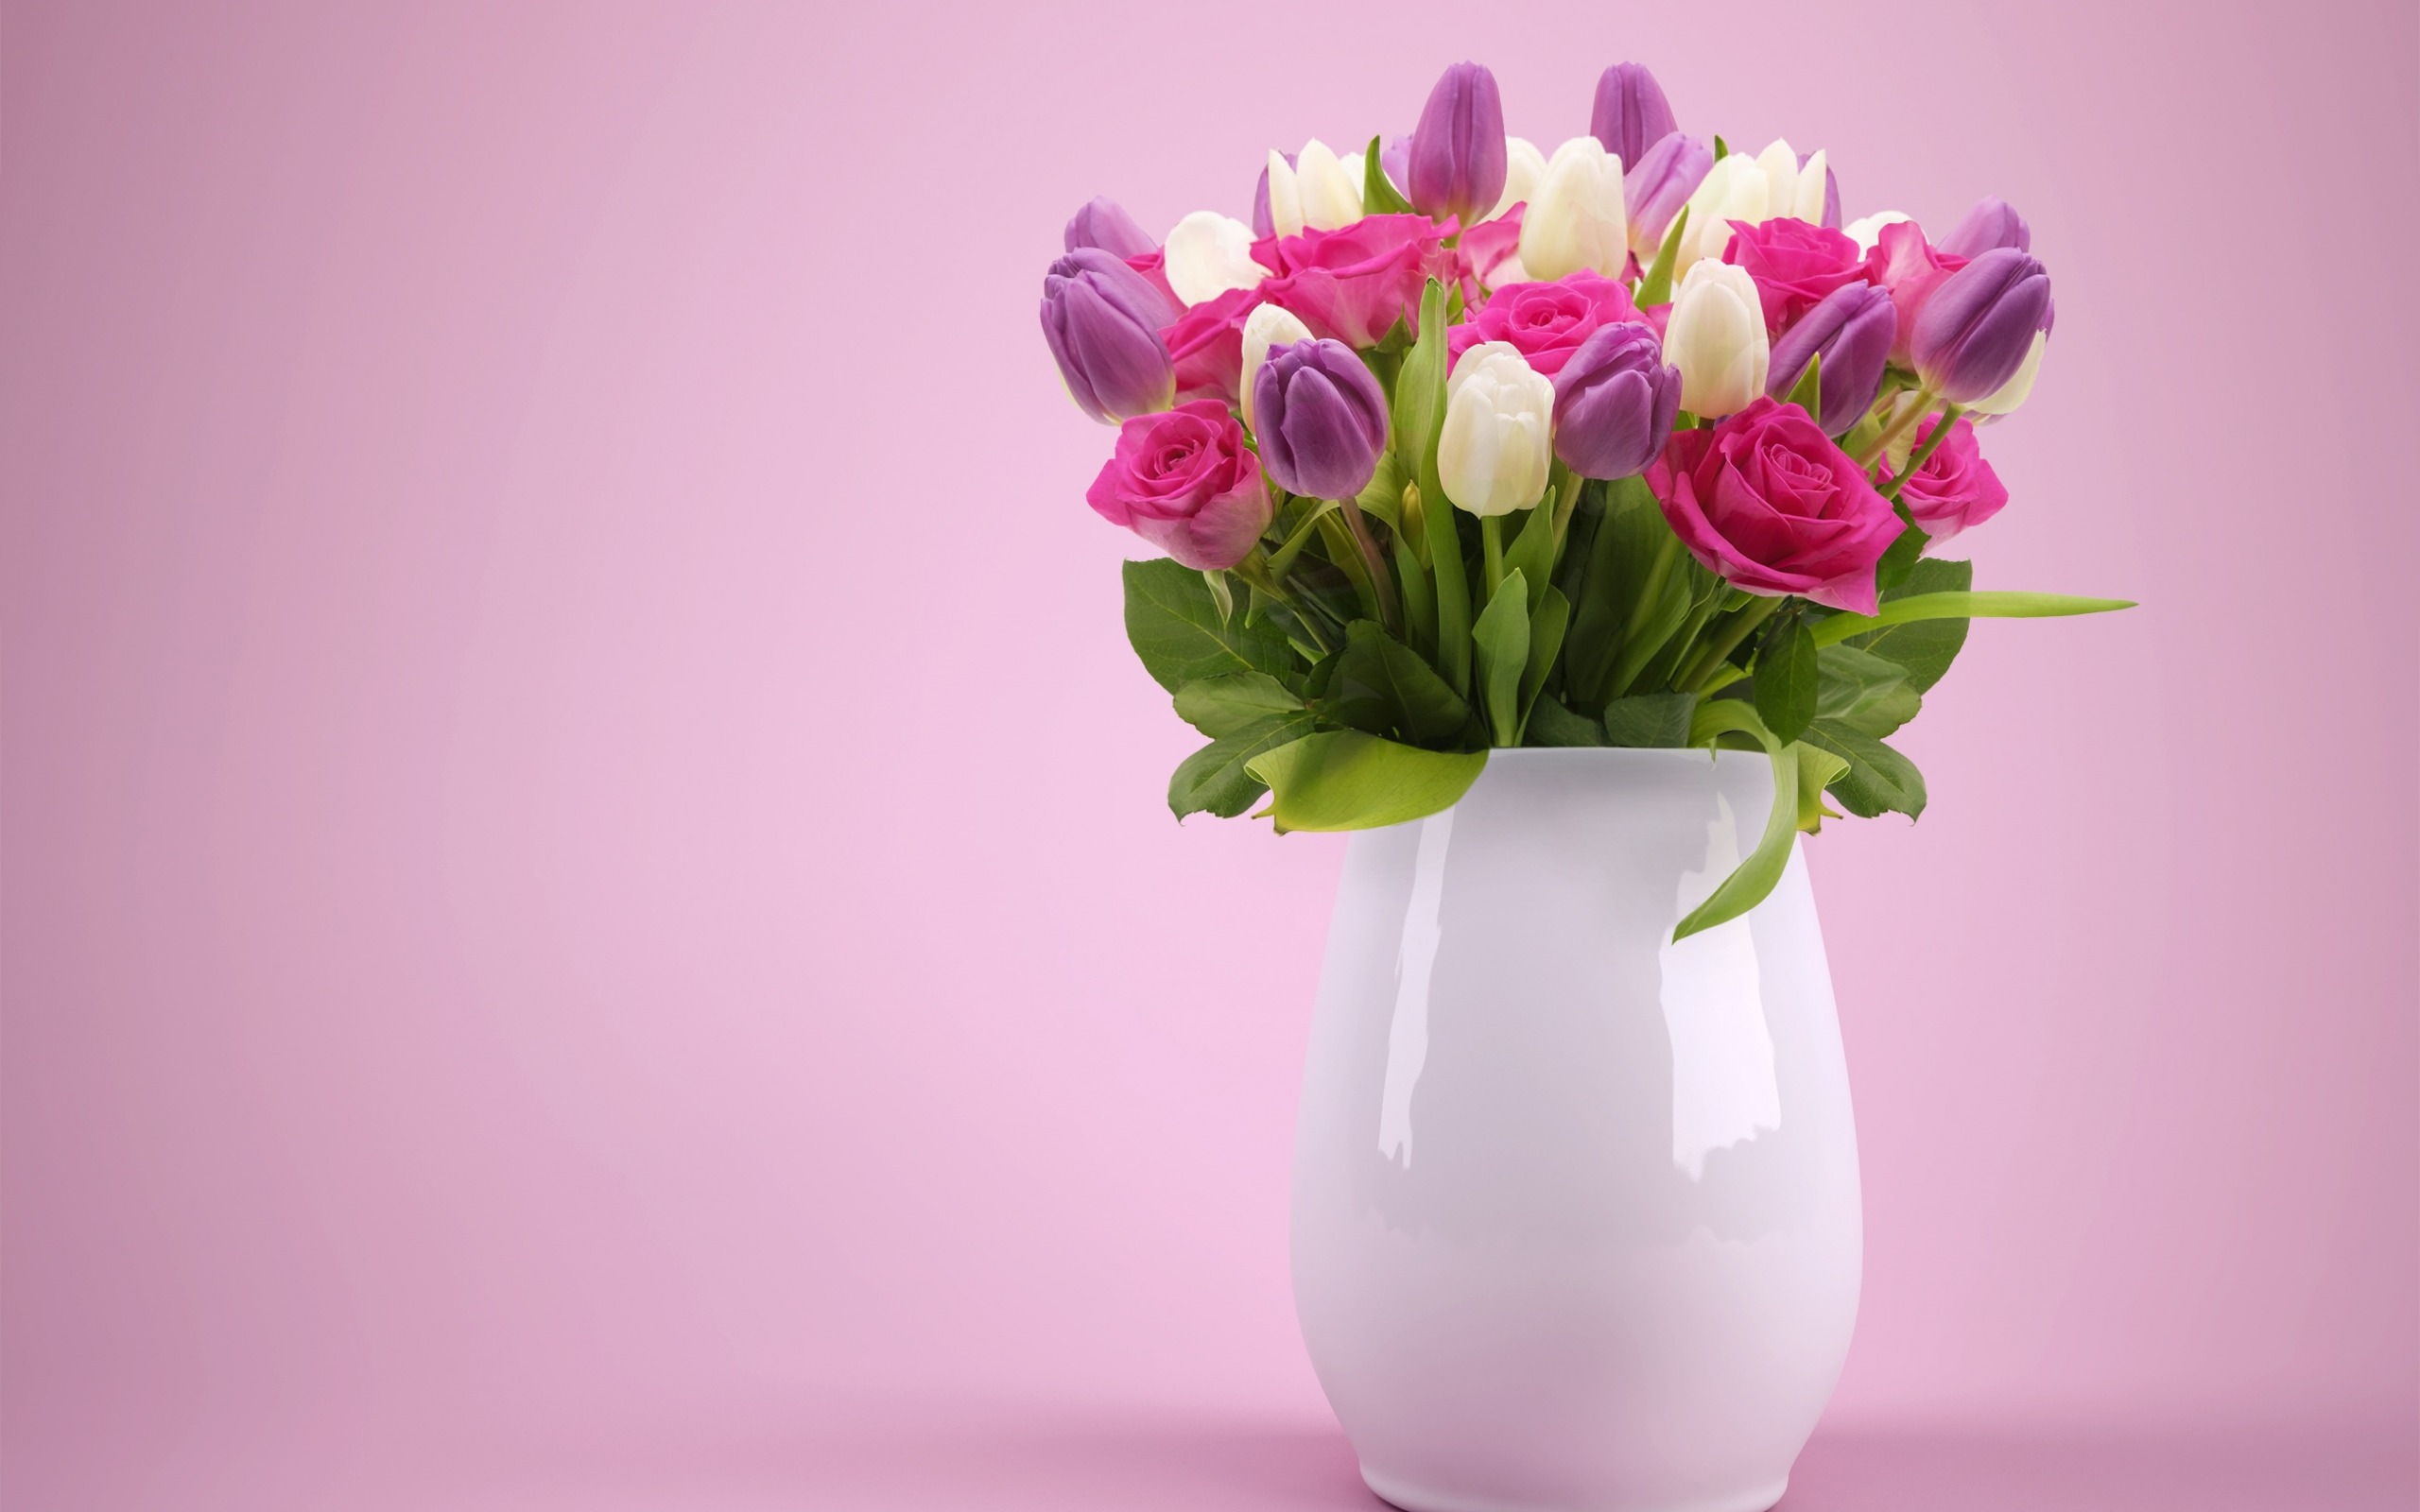 Colorful Spring Bouquet, Flowers In A Vase, Purple - Pink Bouquet Beautiful Flowers - HD Wallpaper 